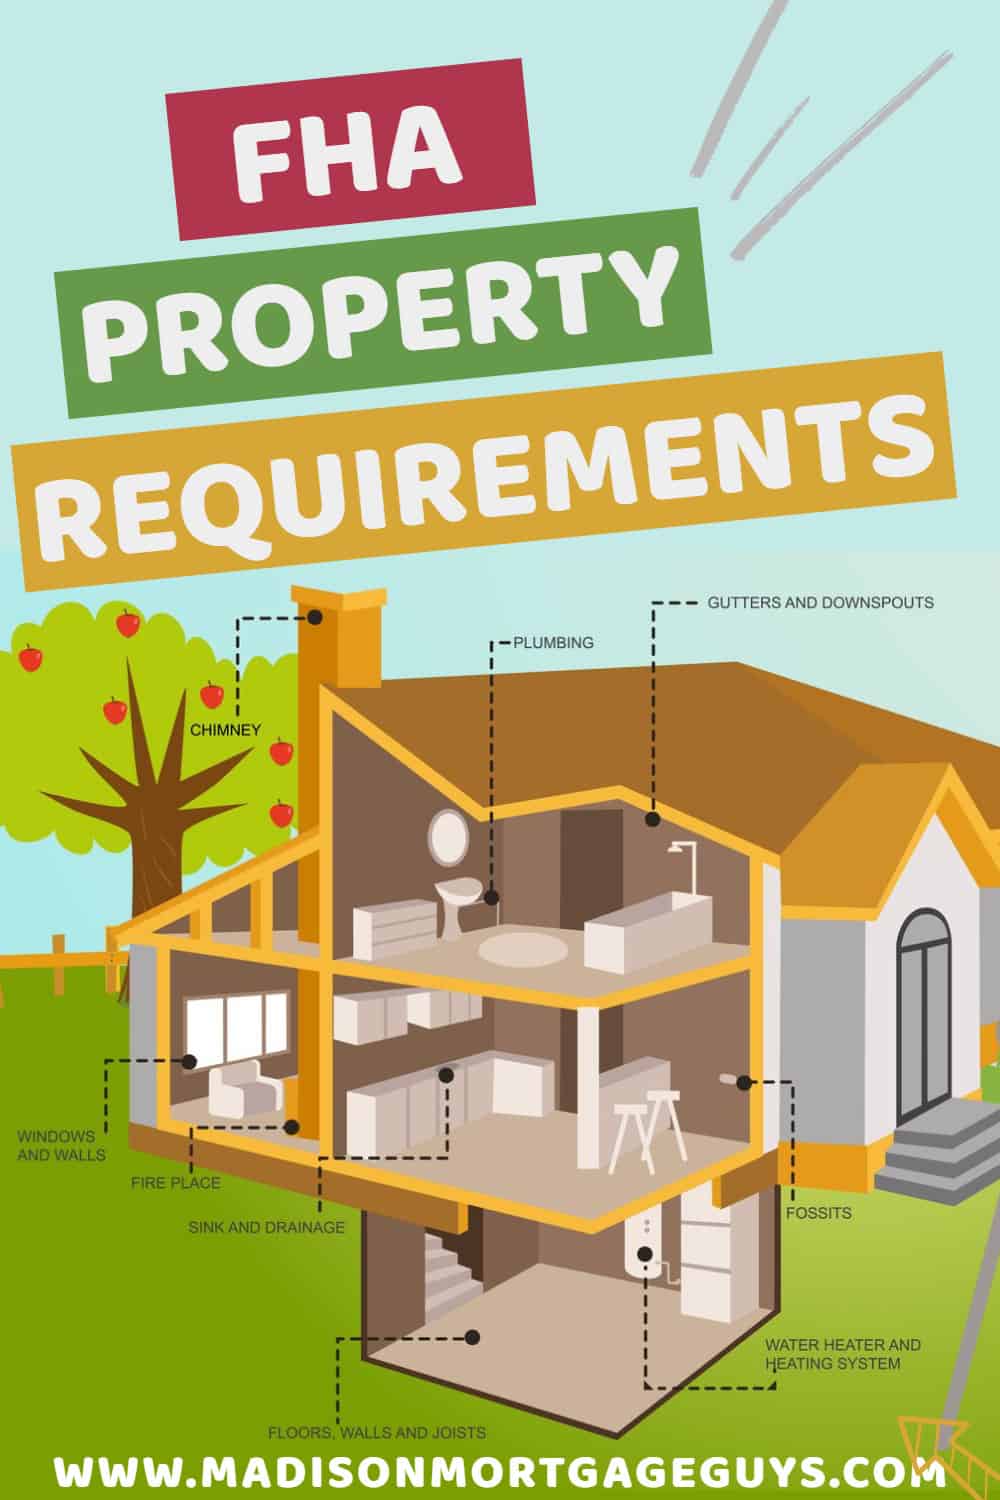 FHA Minimum Property Standards and Property Requirements